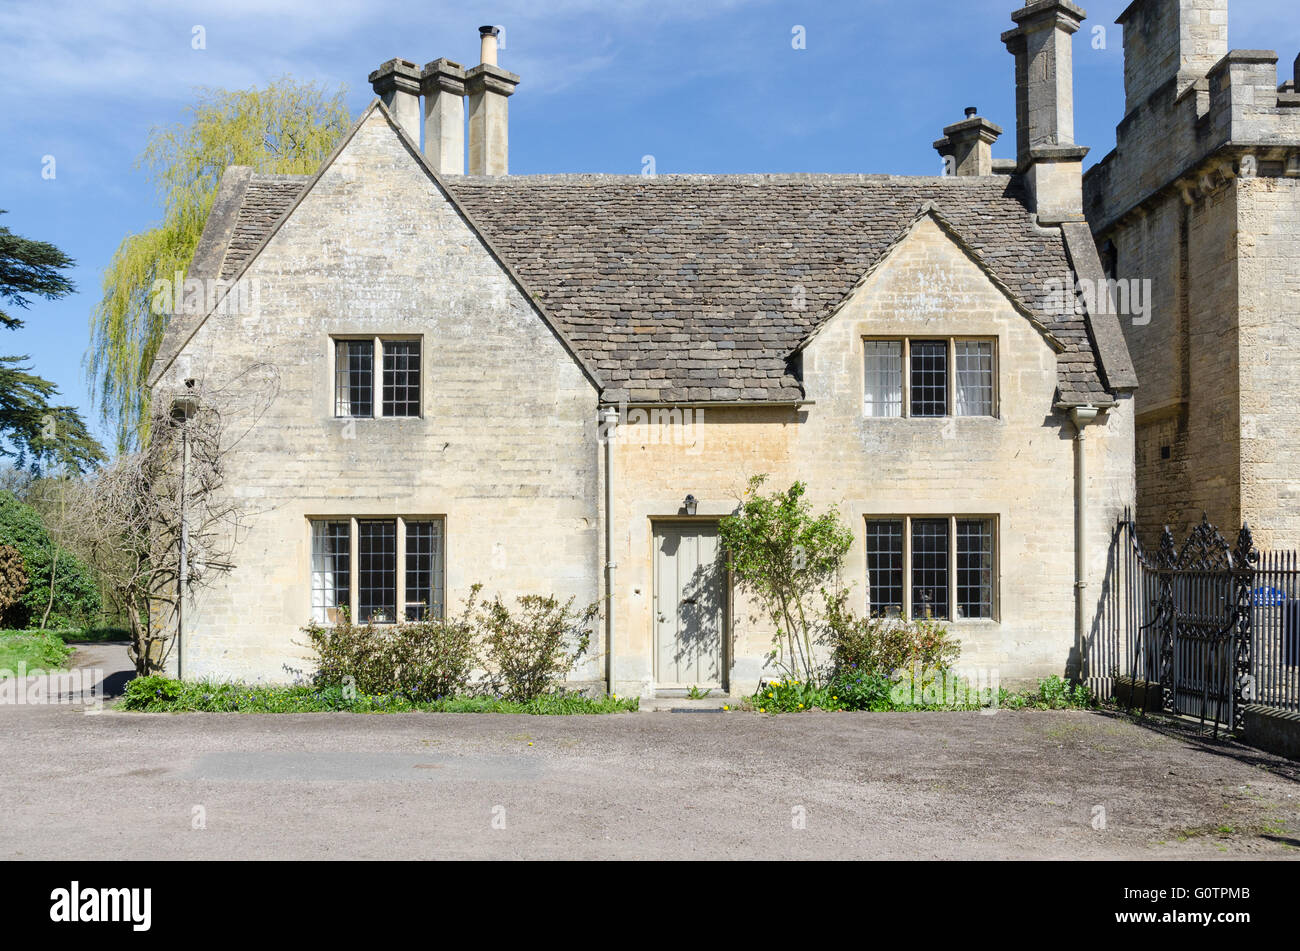 Typical Cotswold stone house at the entrance to Cirencester Park on the Bathurst estate in Cirencester Stock Photo